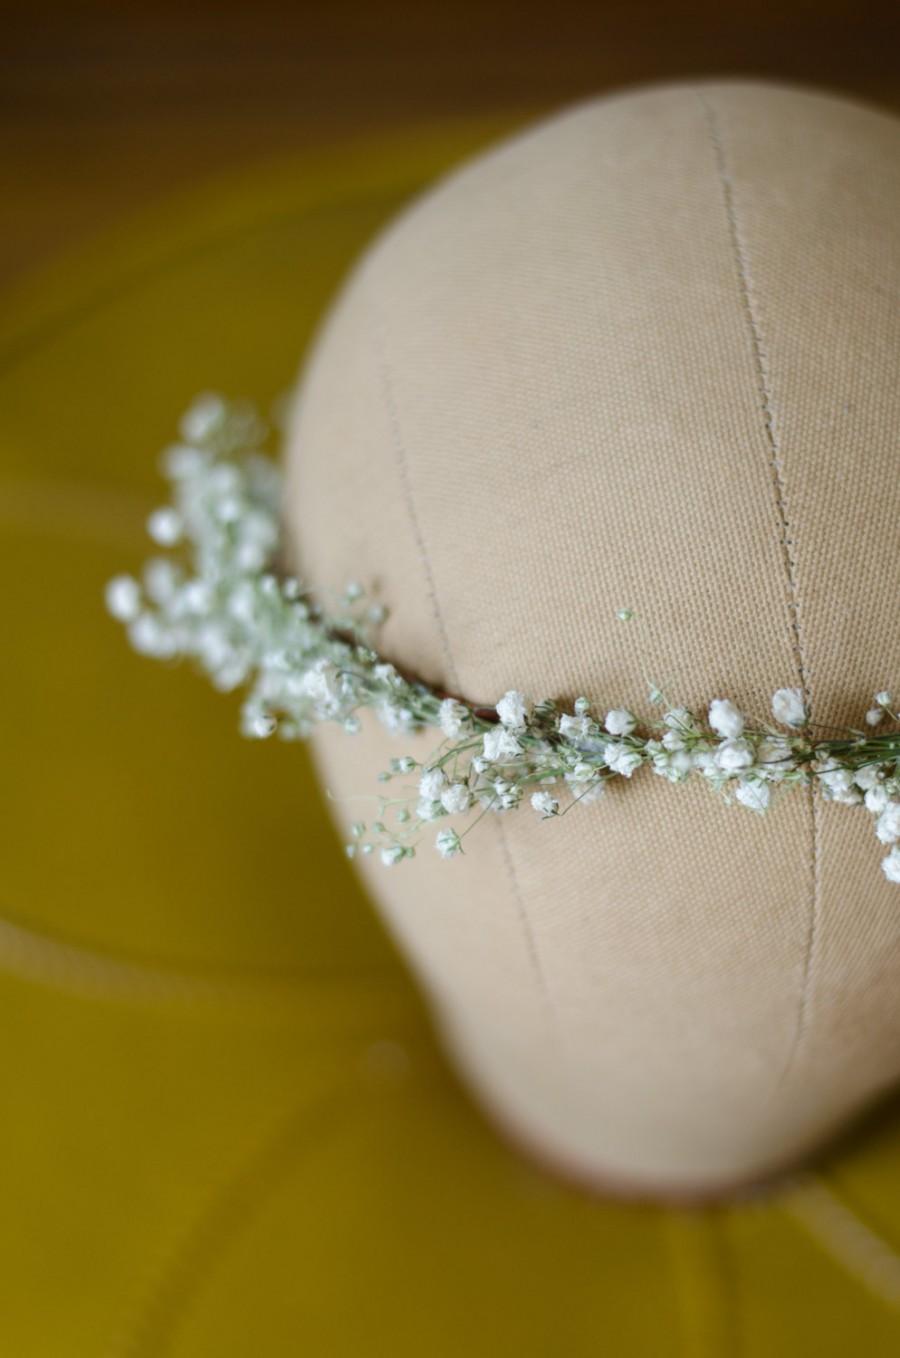 Mariage - Babys Breath Flower Crown / Halo / Hair Wreath with Real Dried Flowers - for Bride Bridal Wedding Party Engagement - THINNER Version